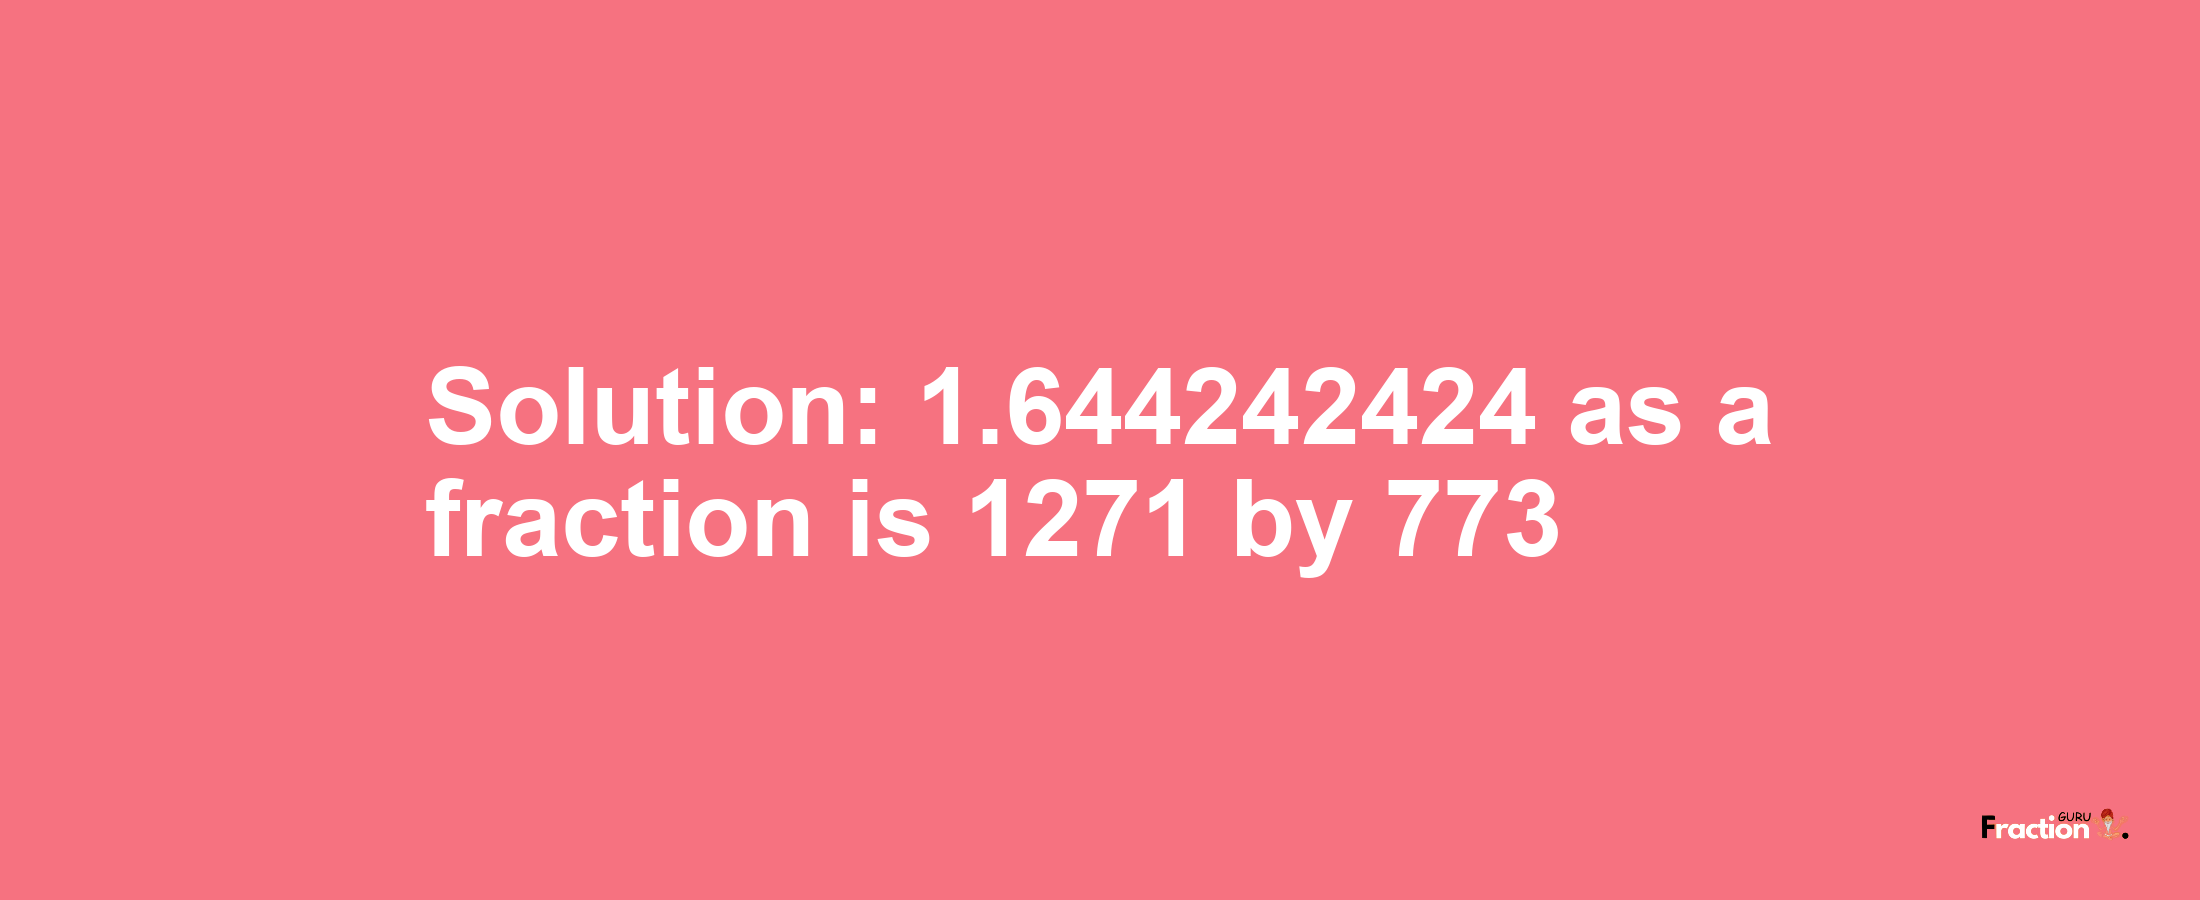 Solution:1.644242424 as a fraction is 1271/773